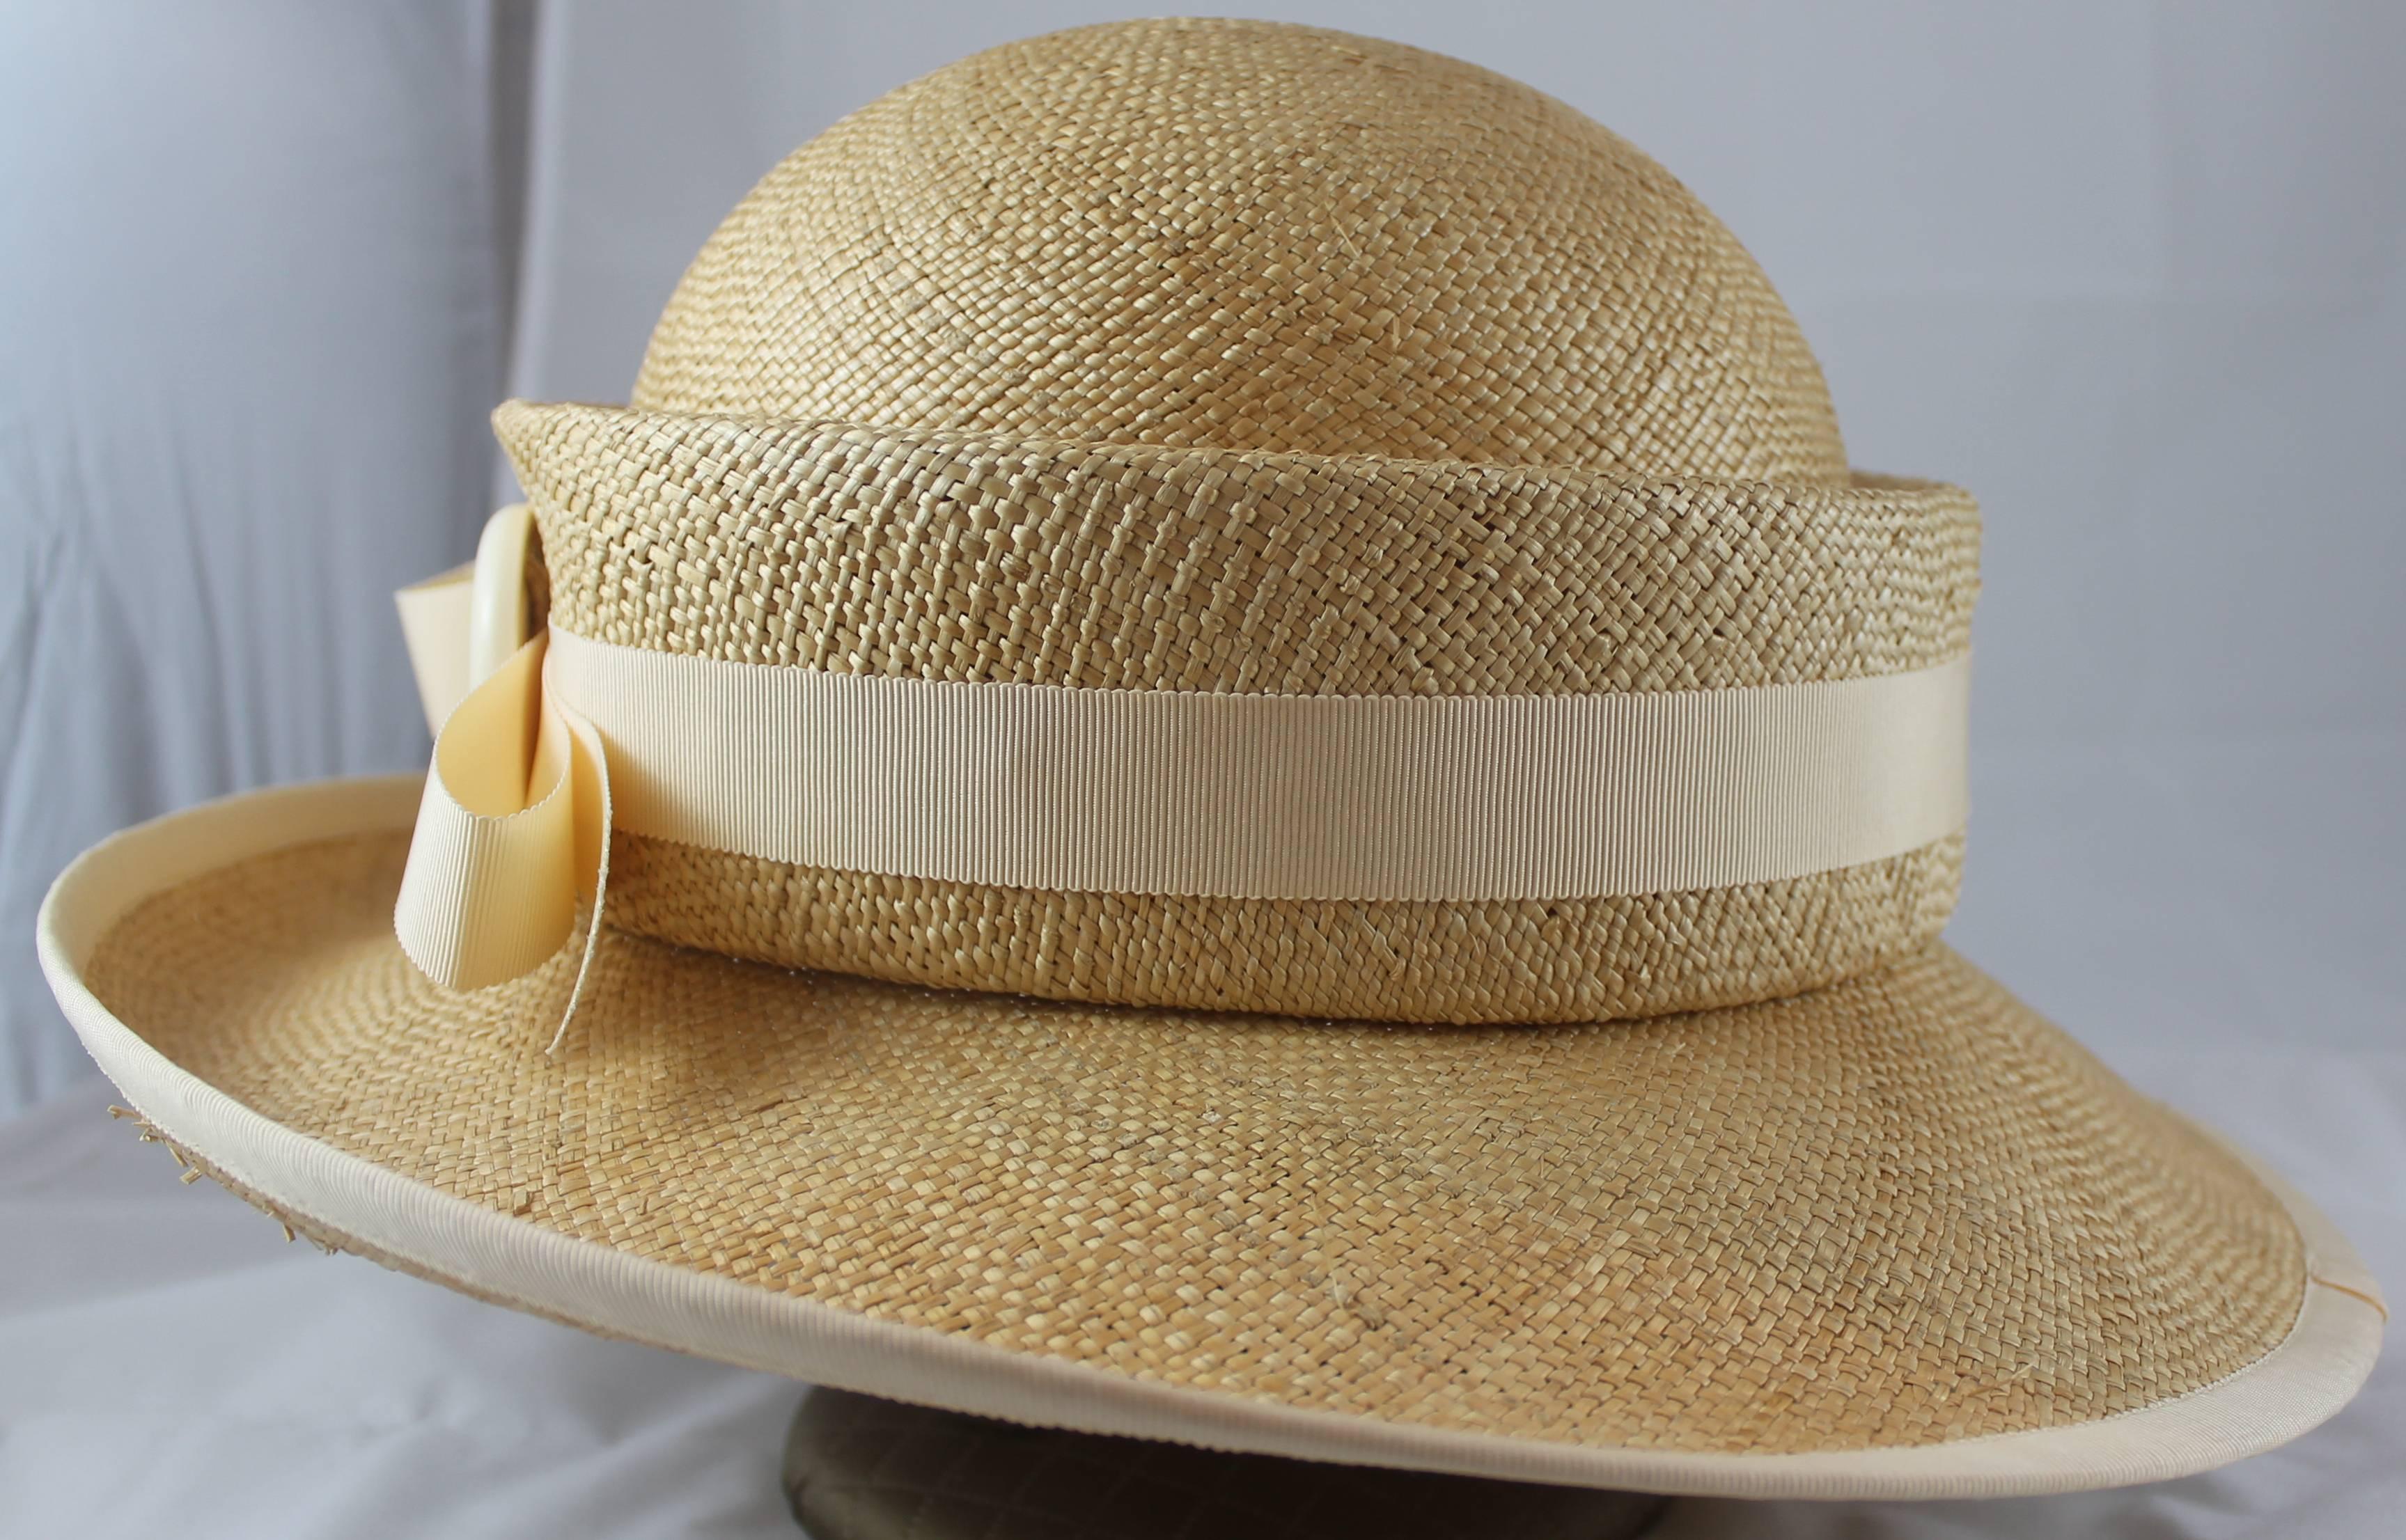 Suzanne Couture Millinery Tan Straw Hat with Ivory Ribbon Trim & Bow. This hat is in excellent condition with some sections of straw poking out on the inside. The hat features a slight front fold and extra straw trim in the center with a bow &